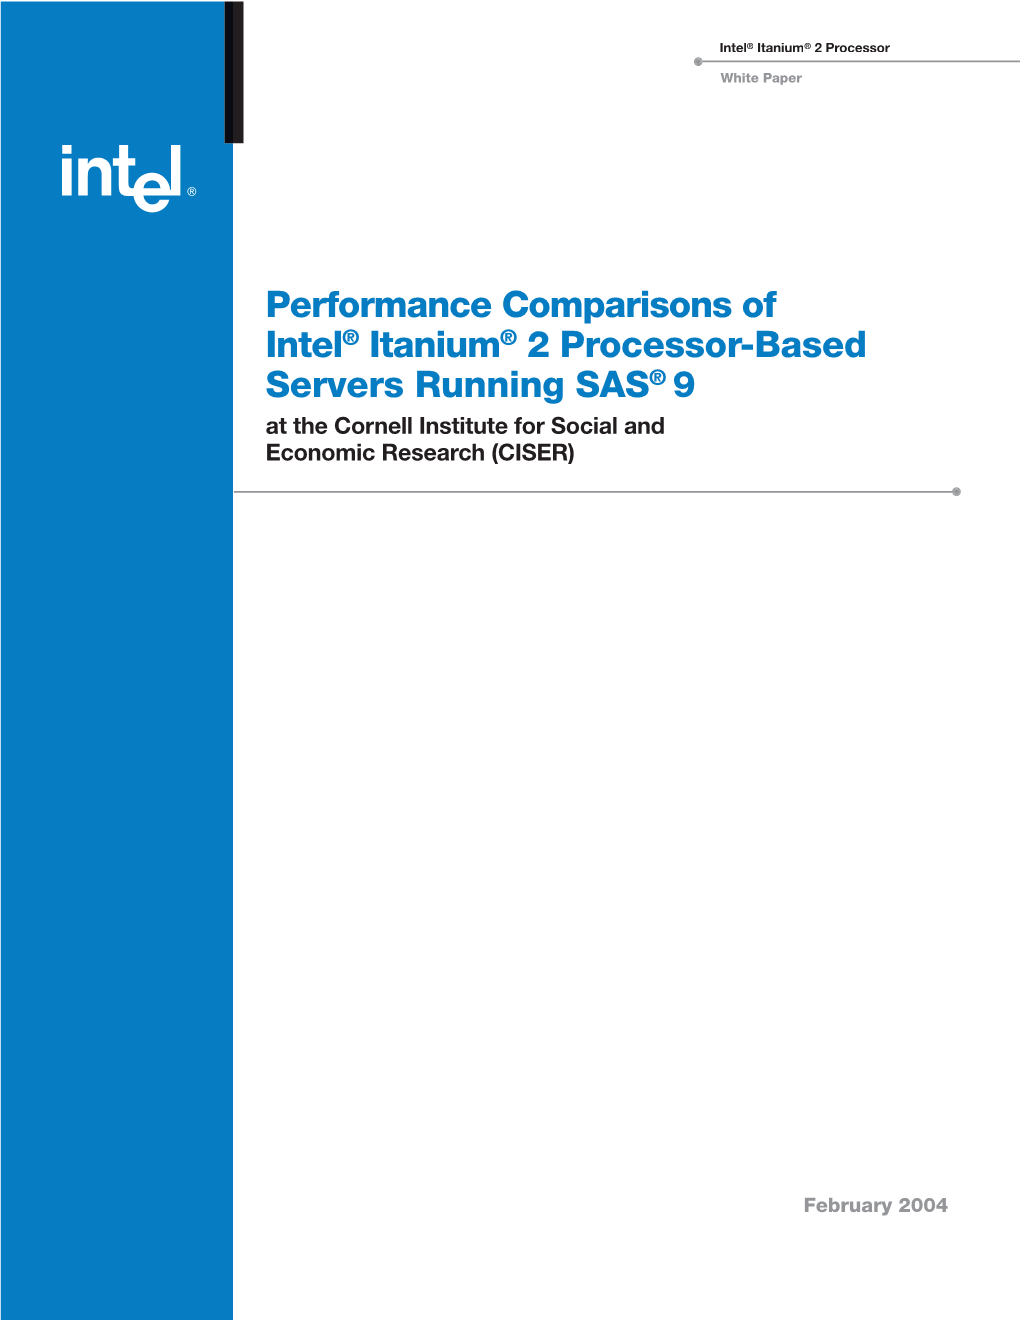 Performance Comparisons of Intel® Itanium® 2 Processor-Based Servers Running SAS® 9 at the Cornell Institute for Social and Economic Research (CISER)